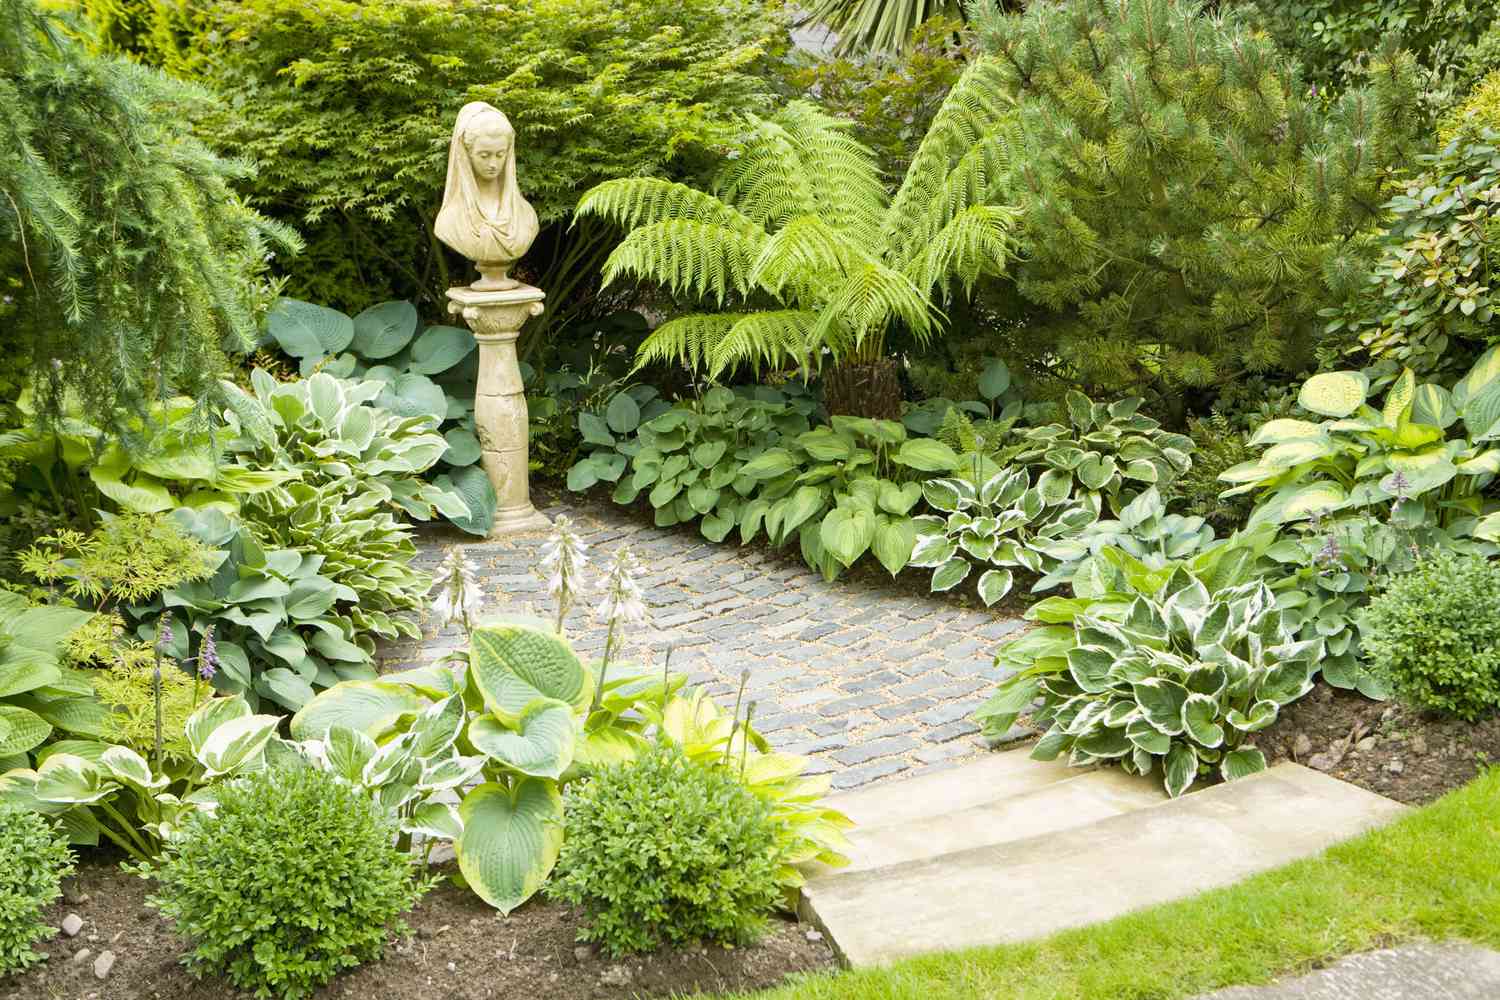 Ferns and hosta line shaded walkway leading to garden statue.